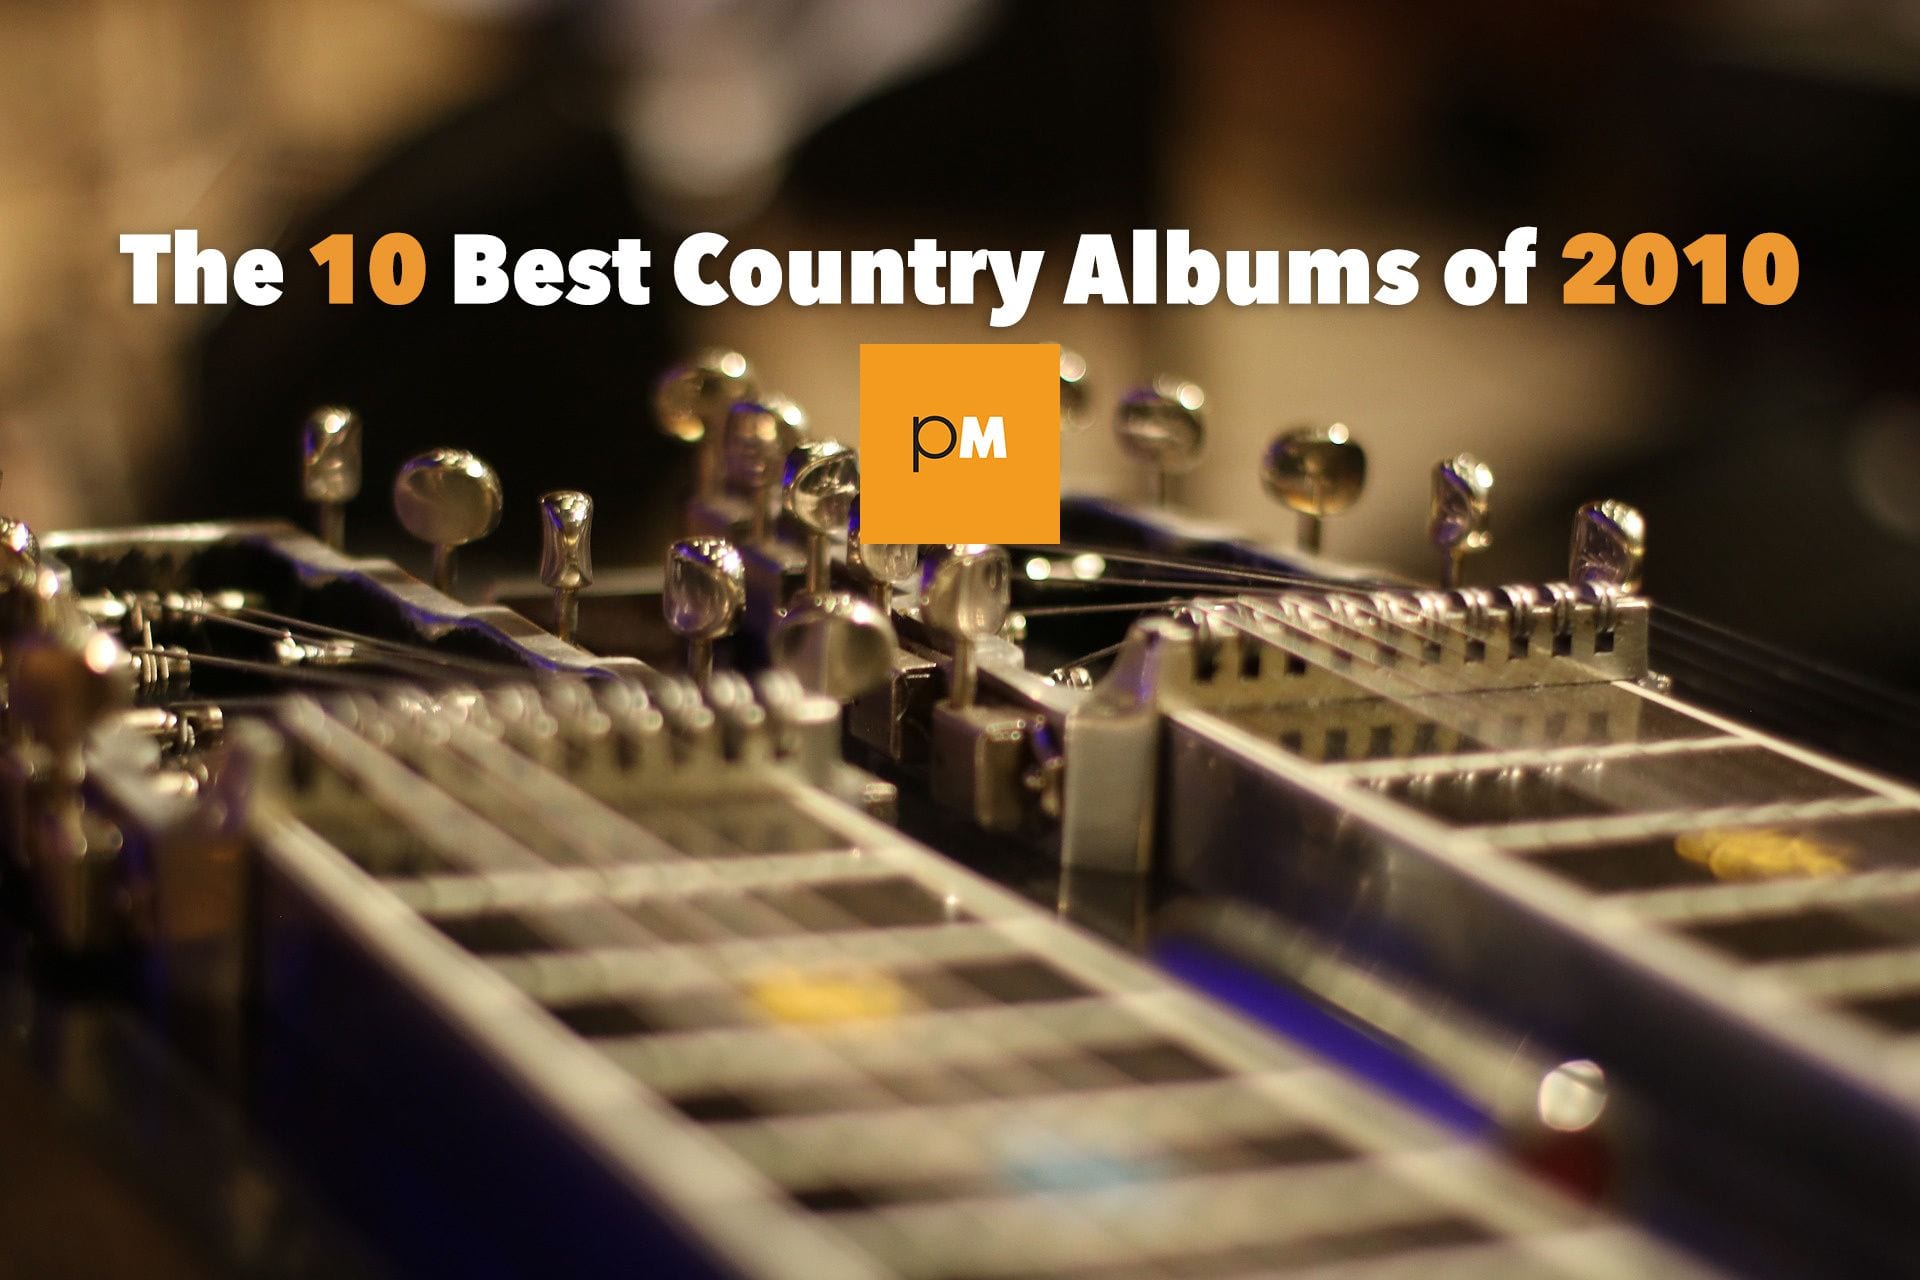 The 10 Best Country Albums of 2010